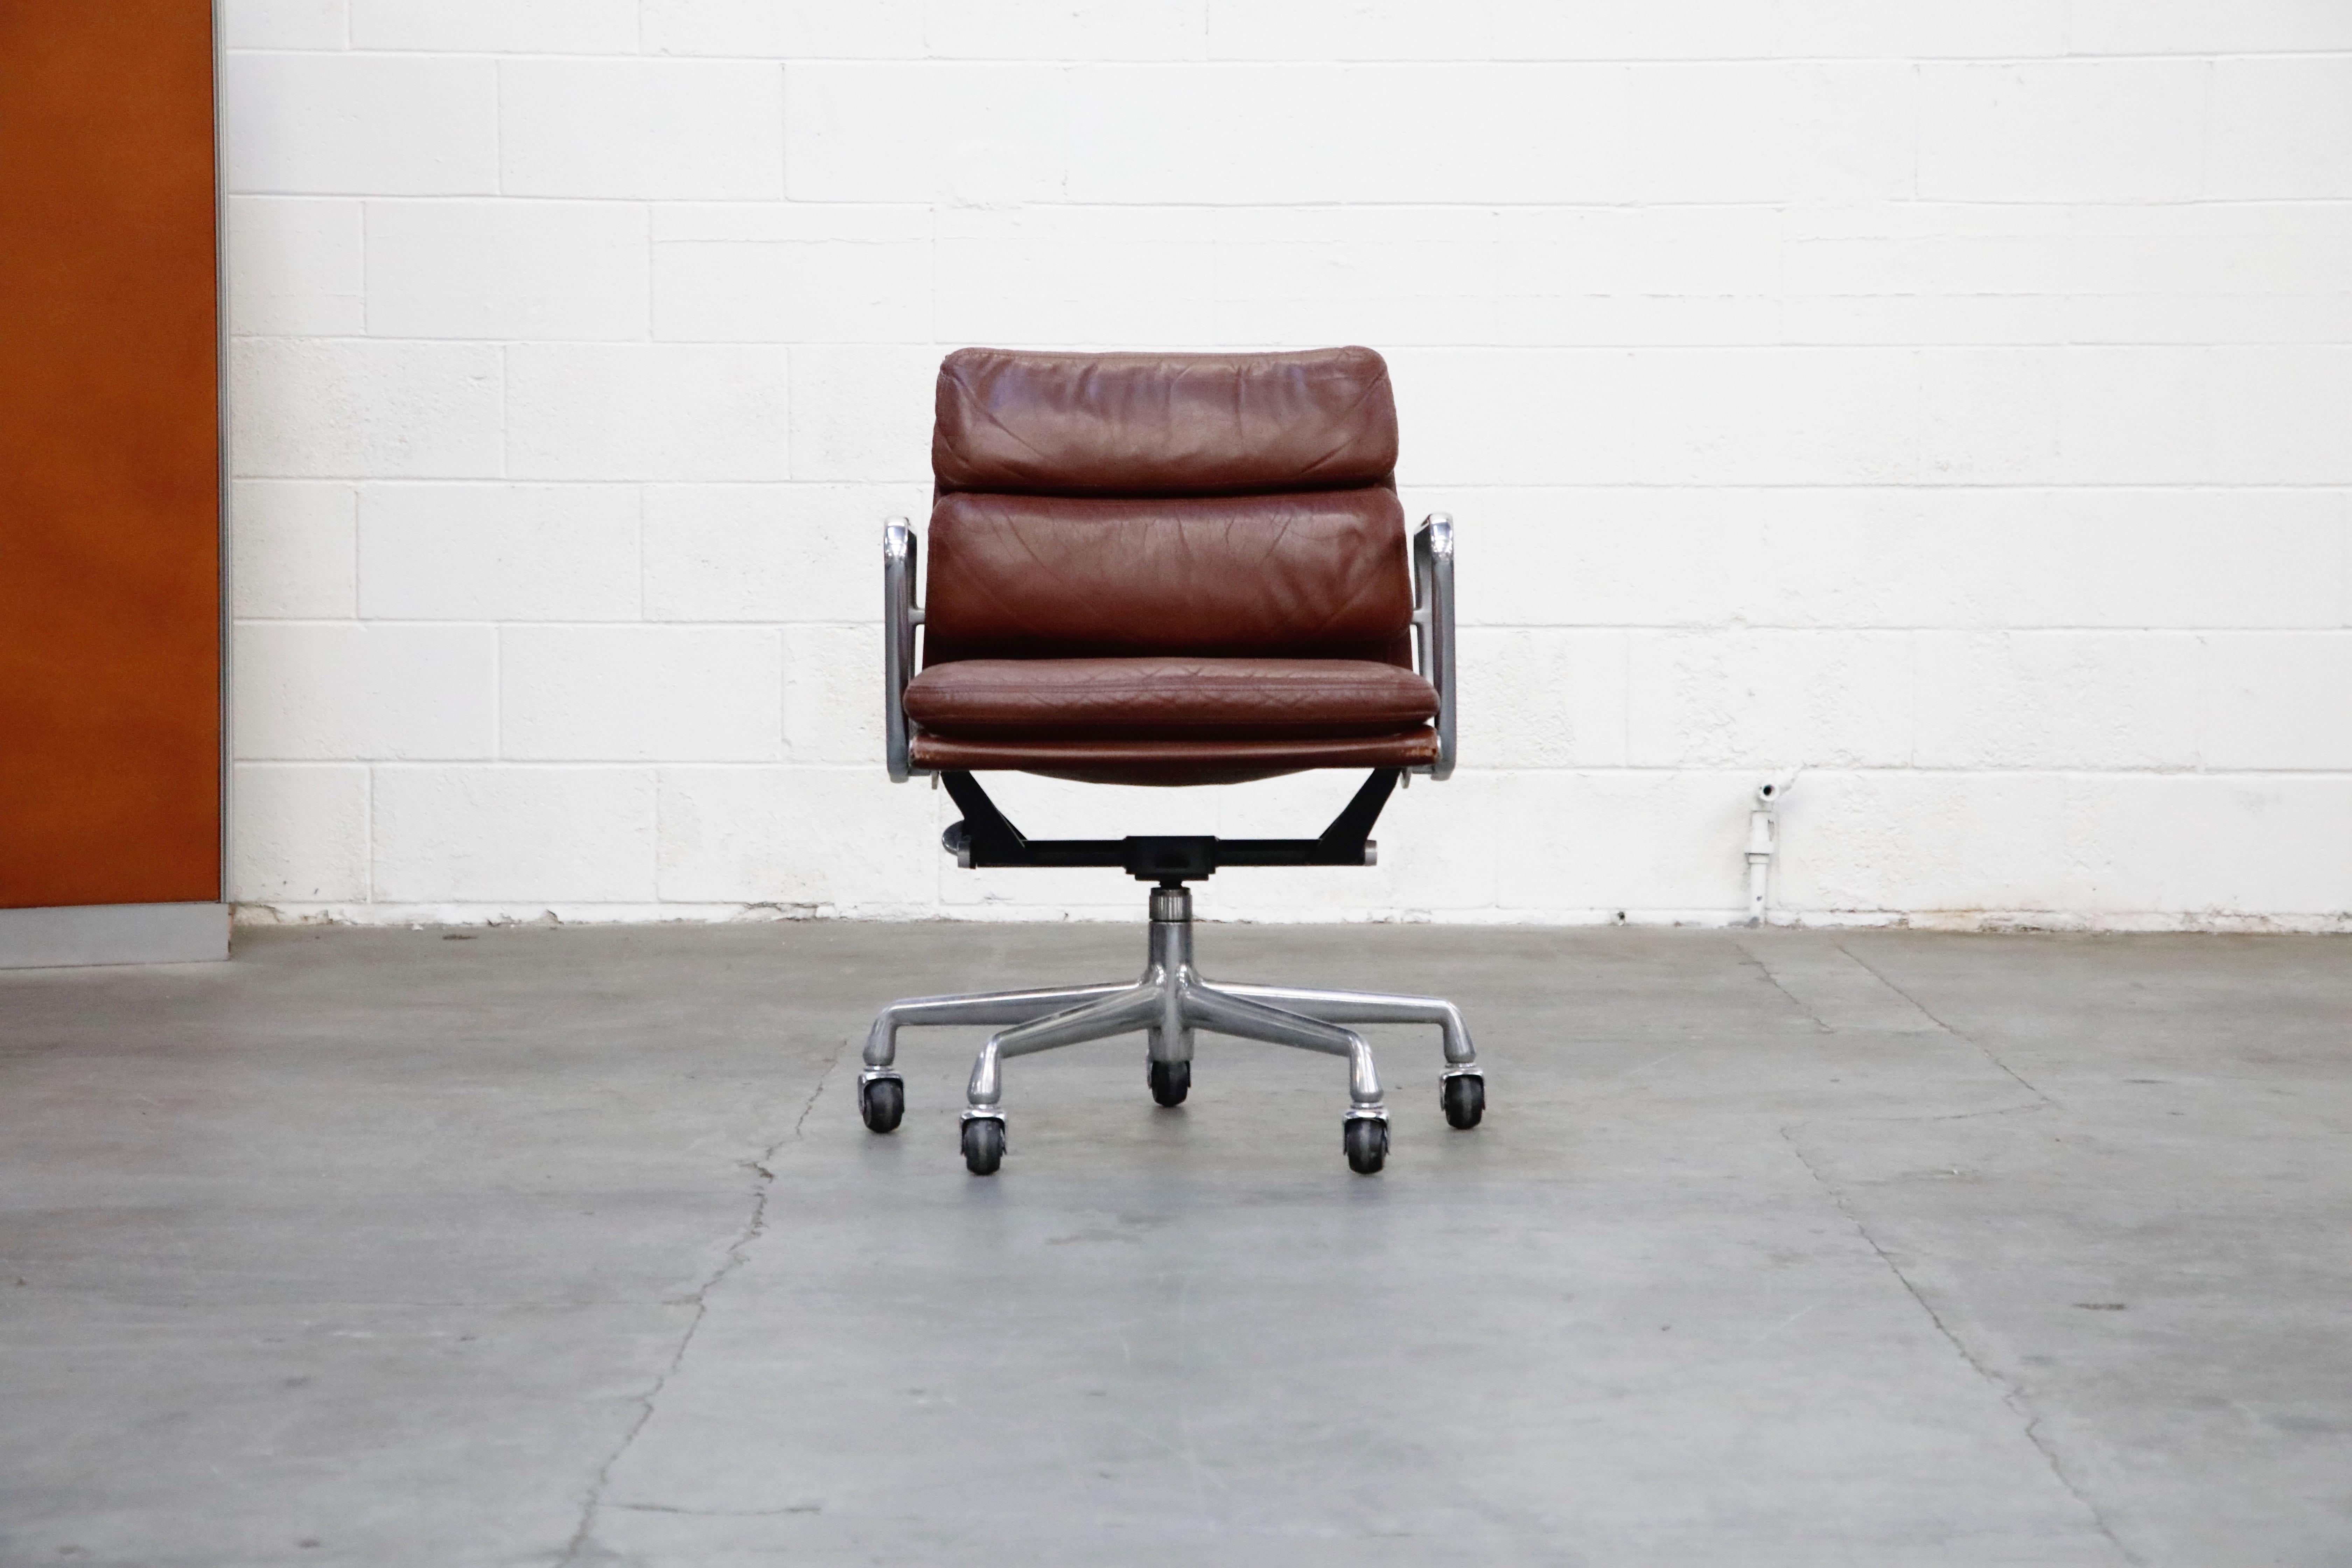 A collectible and sought after leather 'Soft Pad' Management Desk chair from the Aluminum Group line, designed by Charles and Ray Eames for Herman Miller. Featuring its original vintage brown color leather upholstery over five-star aluminum base and